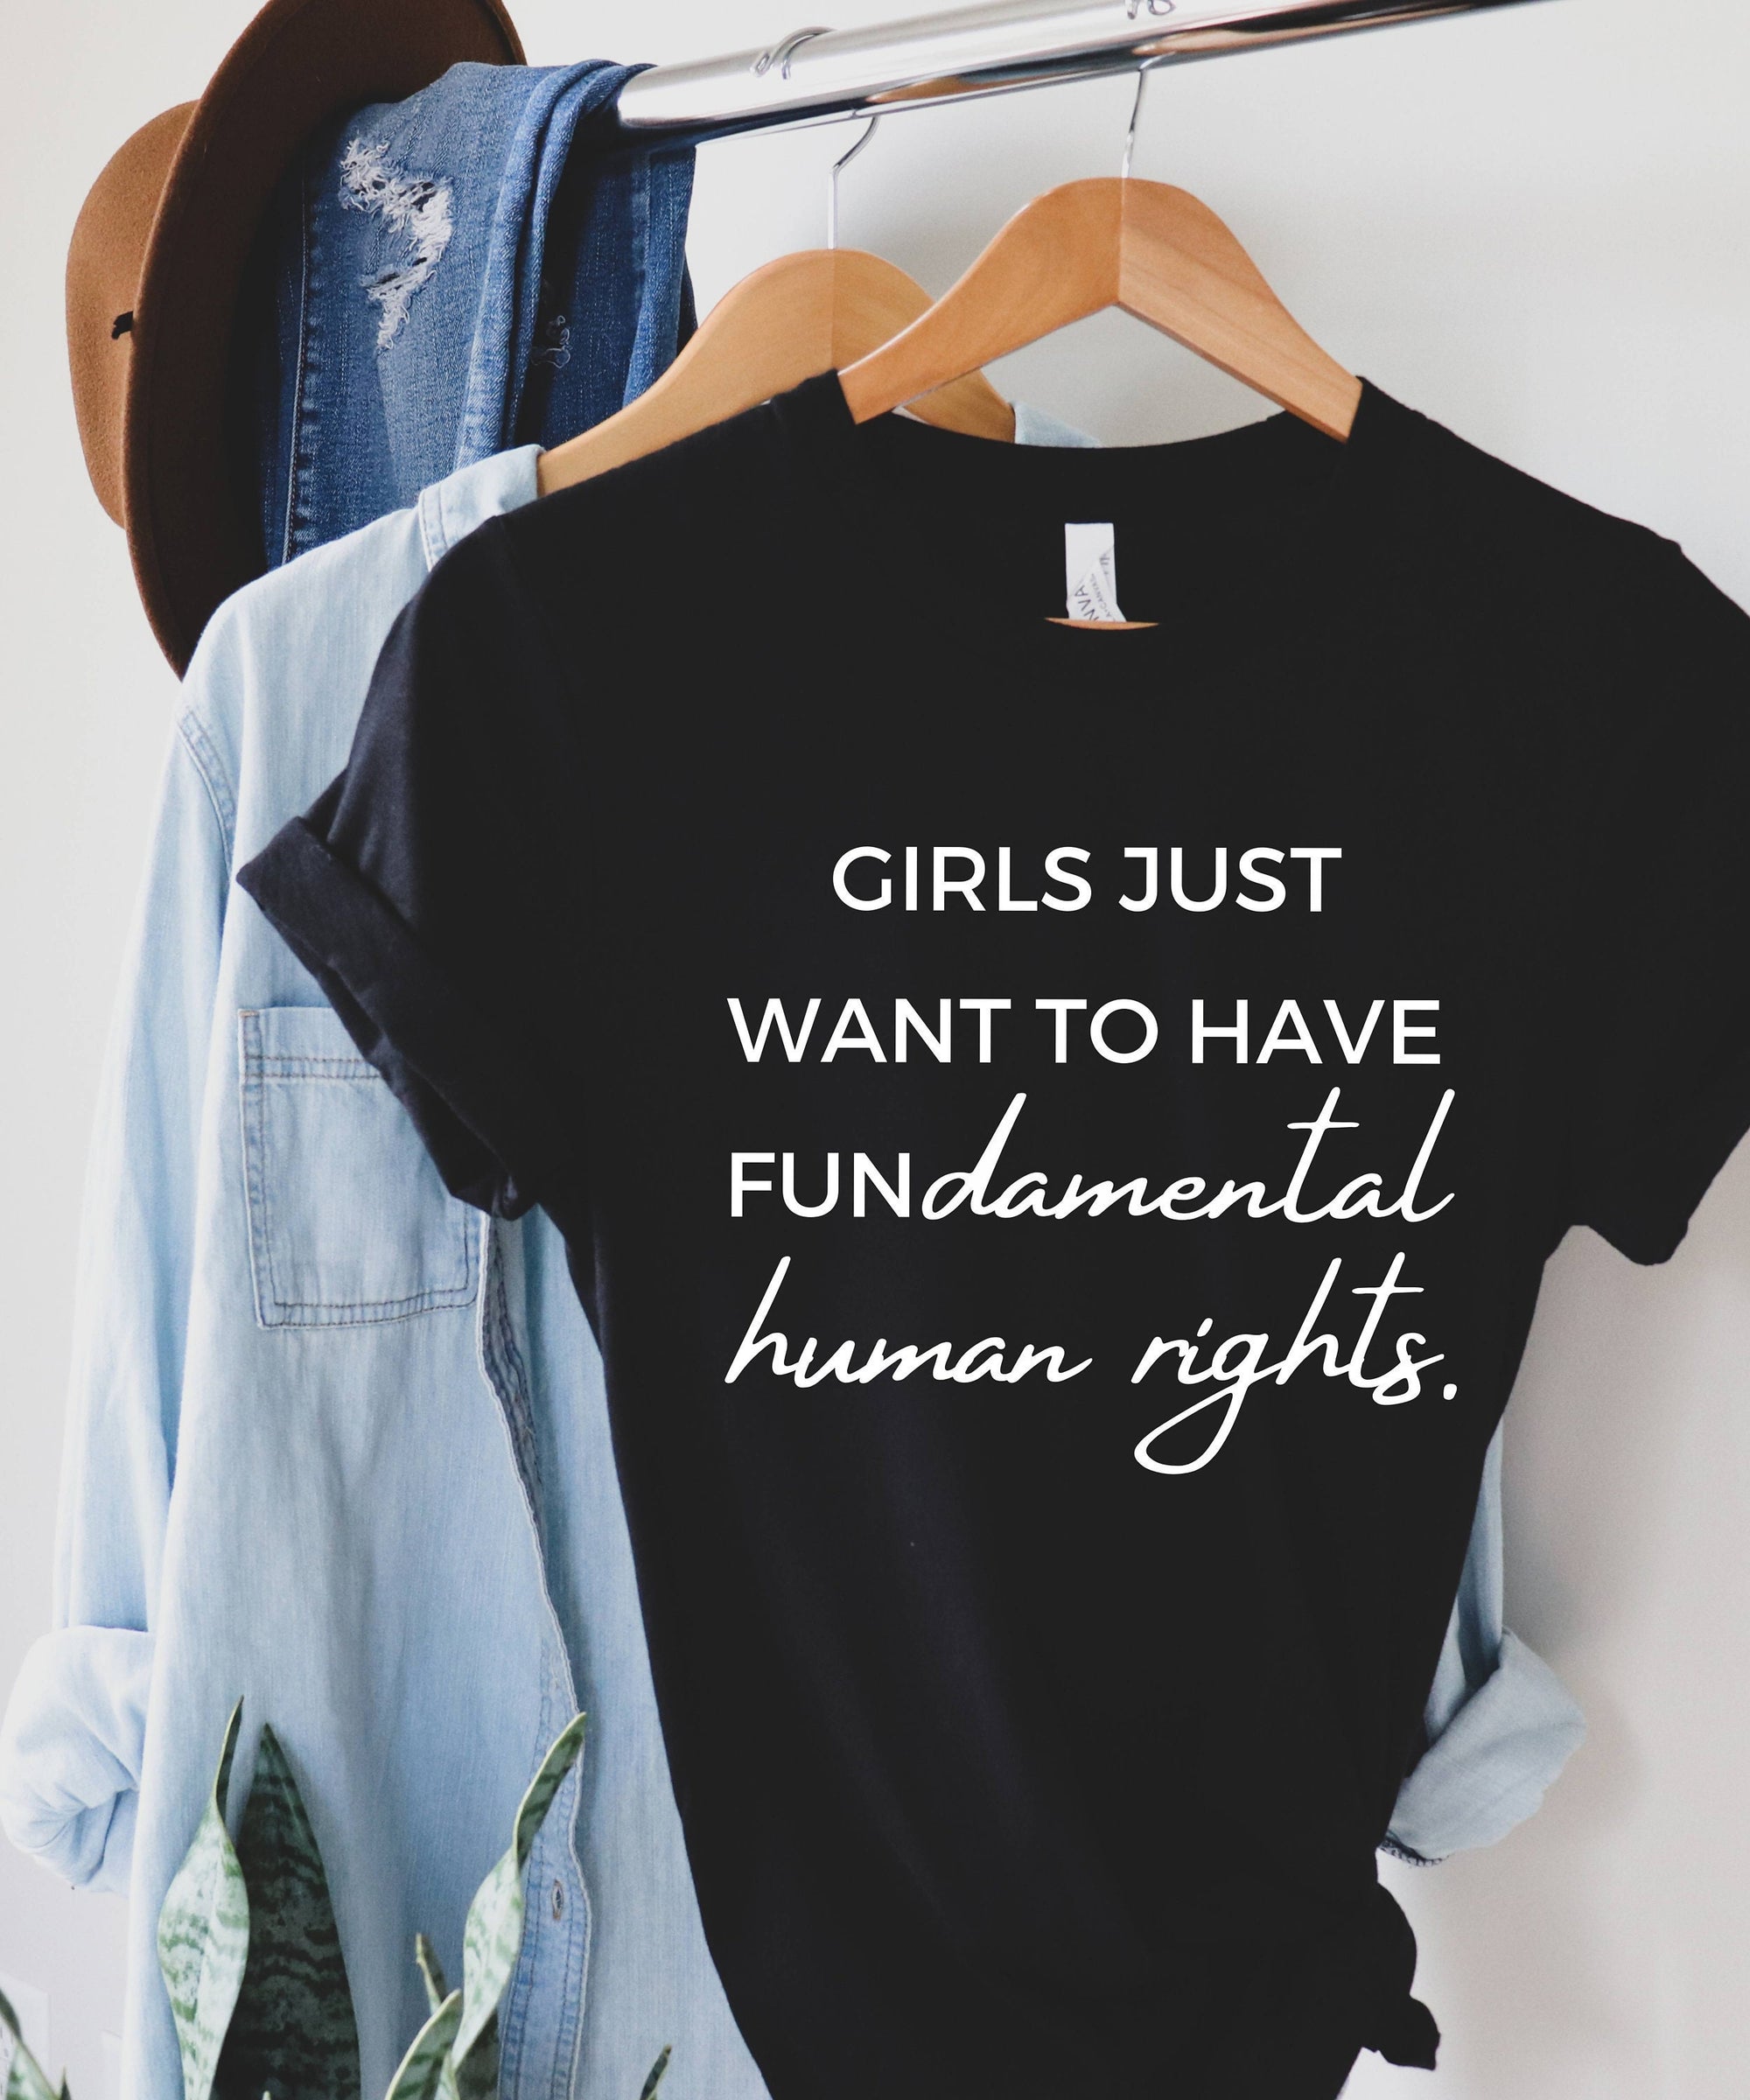 Feminist Shirt Girl Power Shirt Girls Just Want to Have Fundamental Human Rights GRL PWR shirt gift for her girl boss strong woman shirt